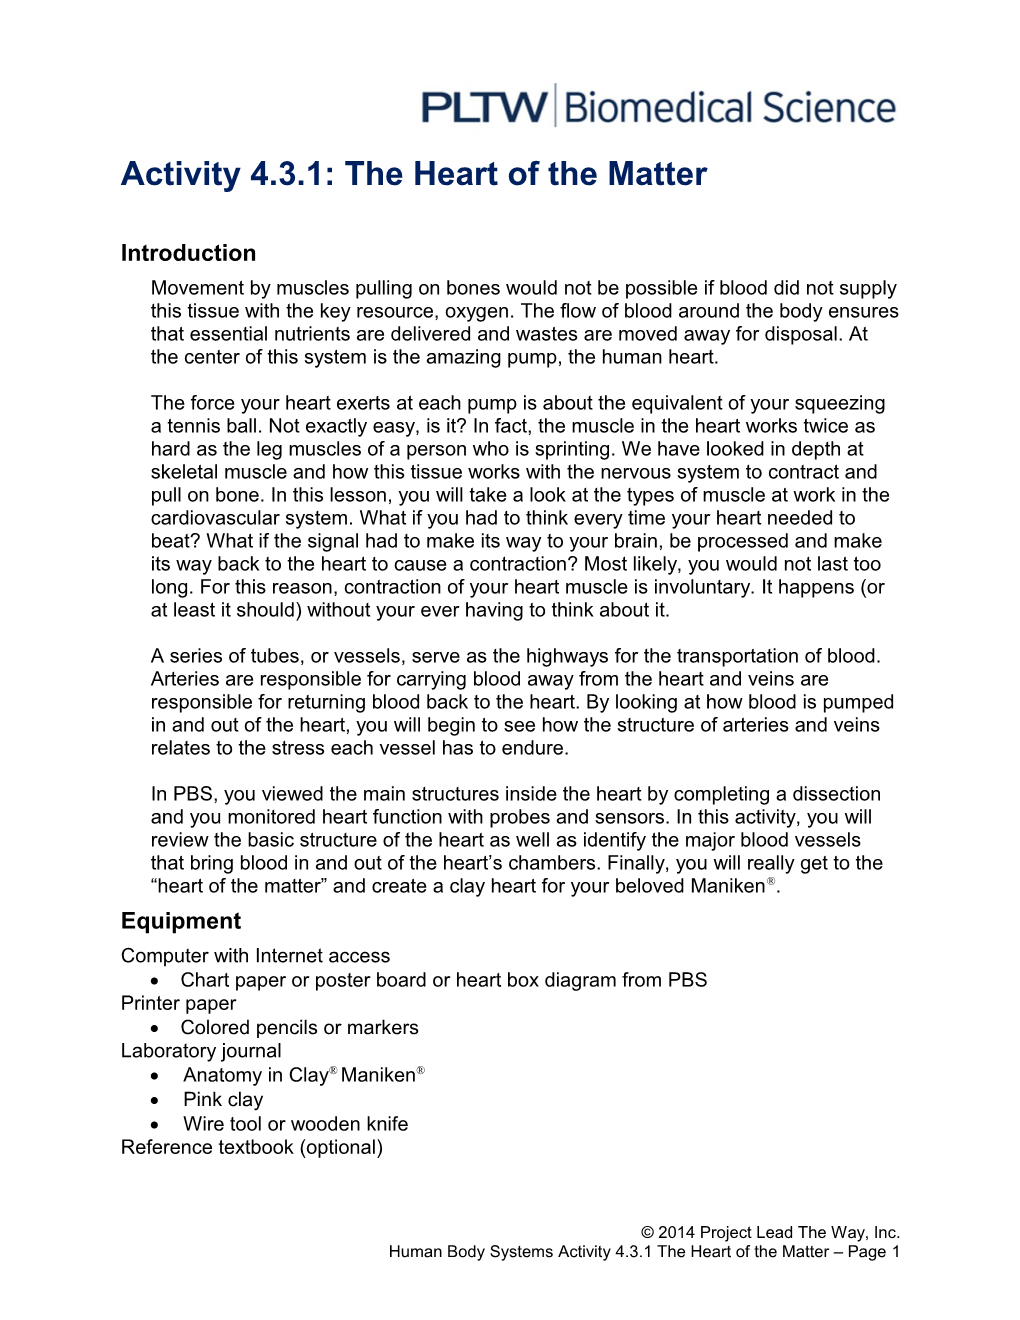 Activity 4.3.1: the Heart of the Matter